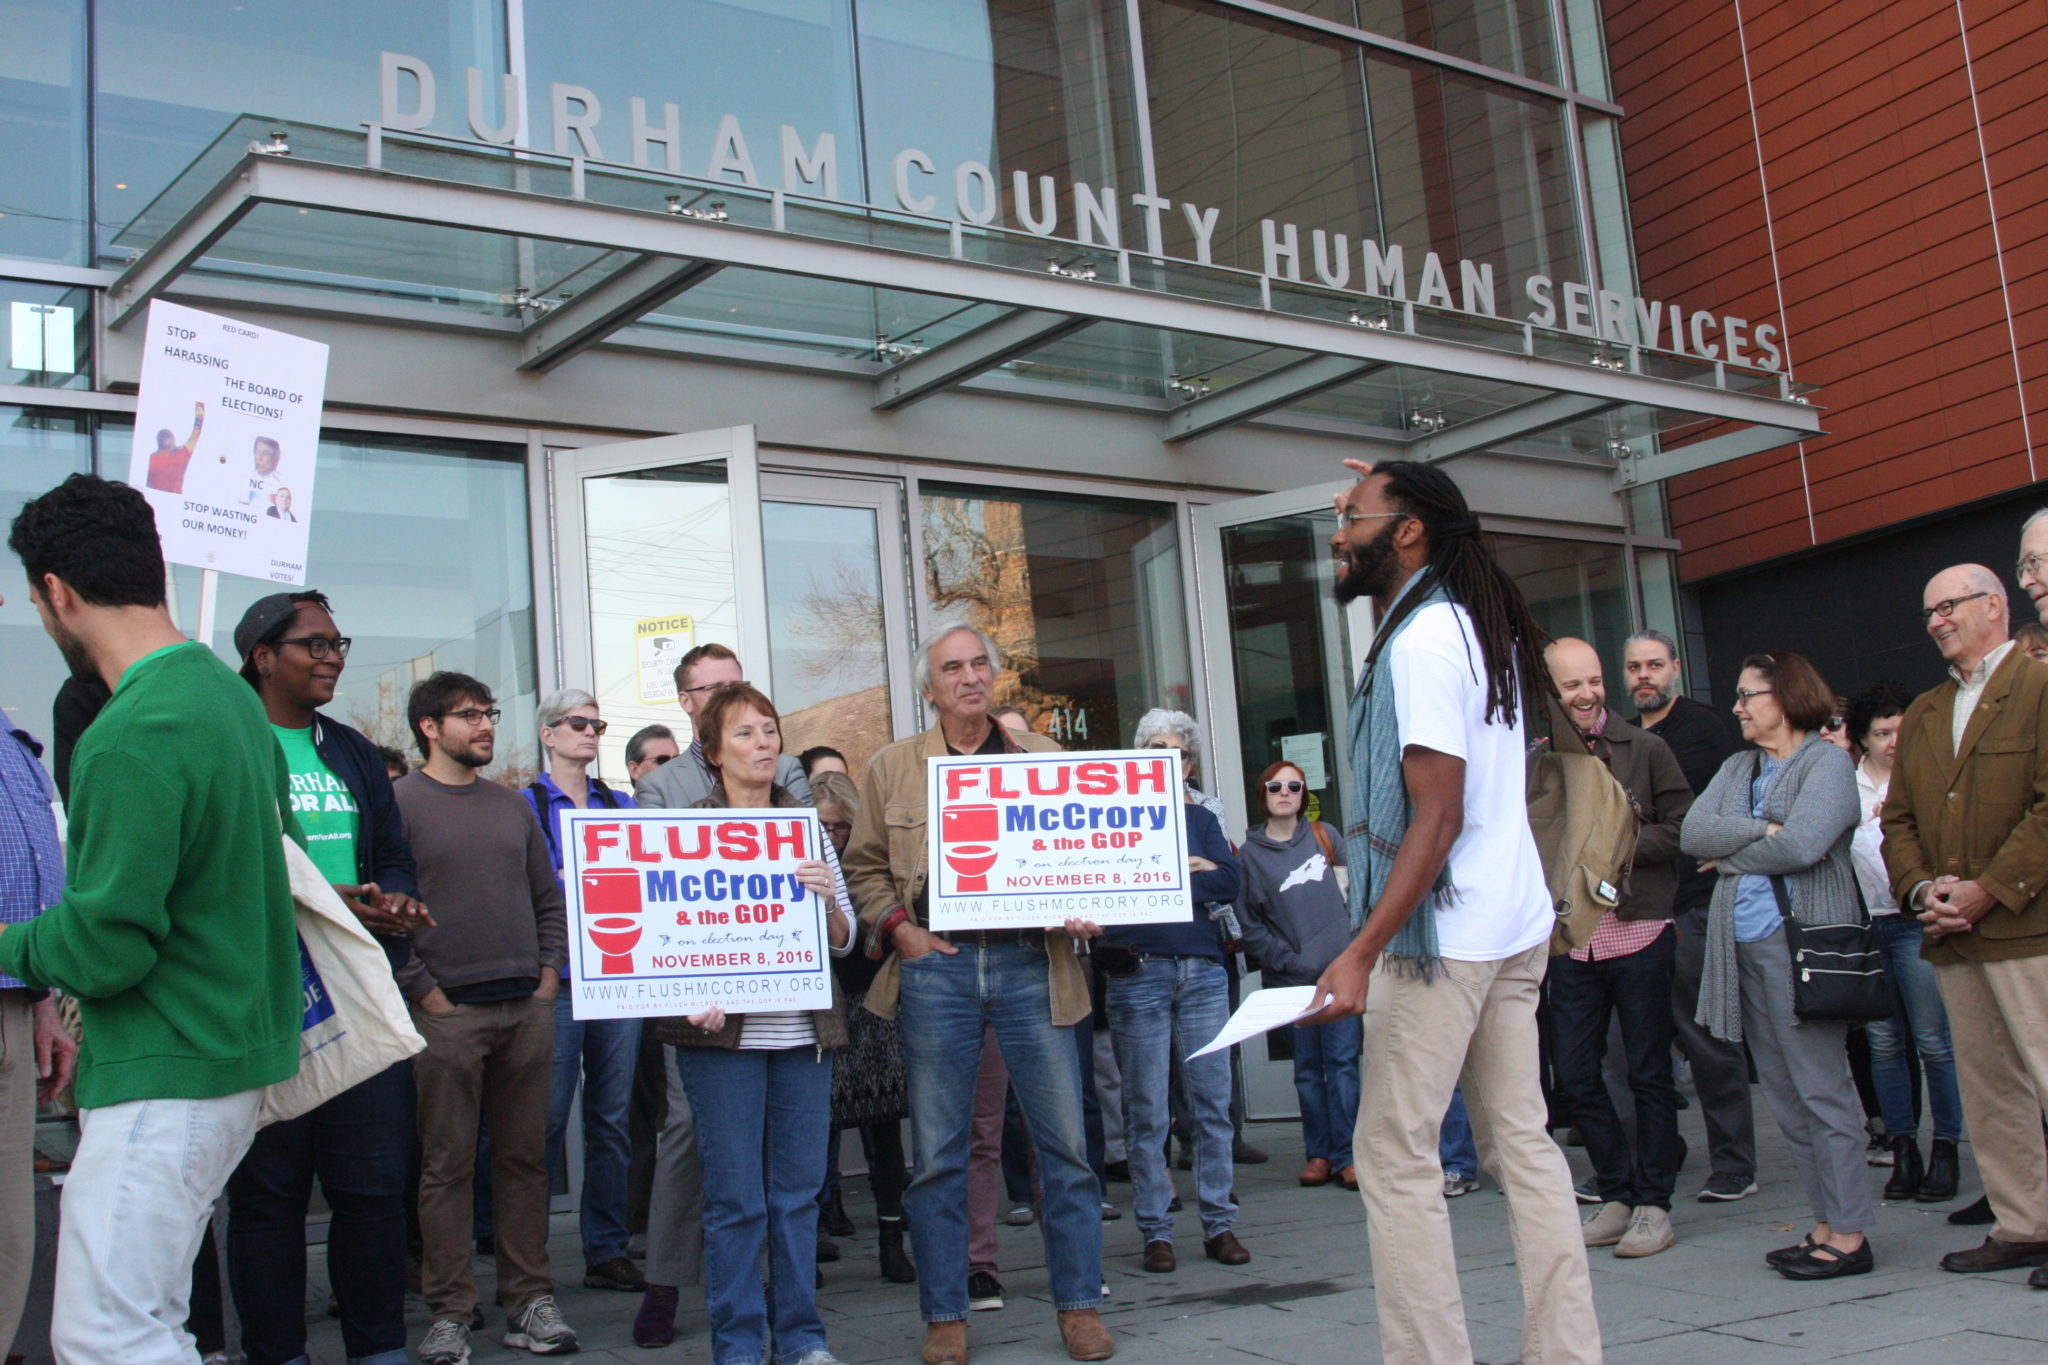 Durham in Defiance, a group opposing the election of President-elect Donald Trump, organized a demonstration Friday morning outside the Durham County Board of Elections hearing. (CJ photo by Dan Way)